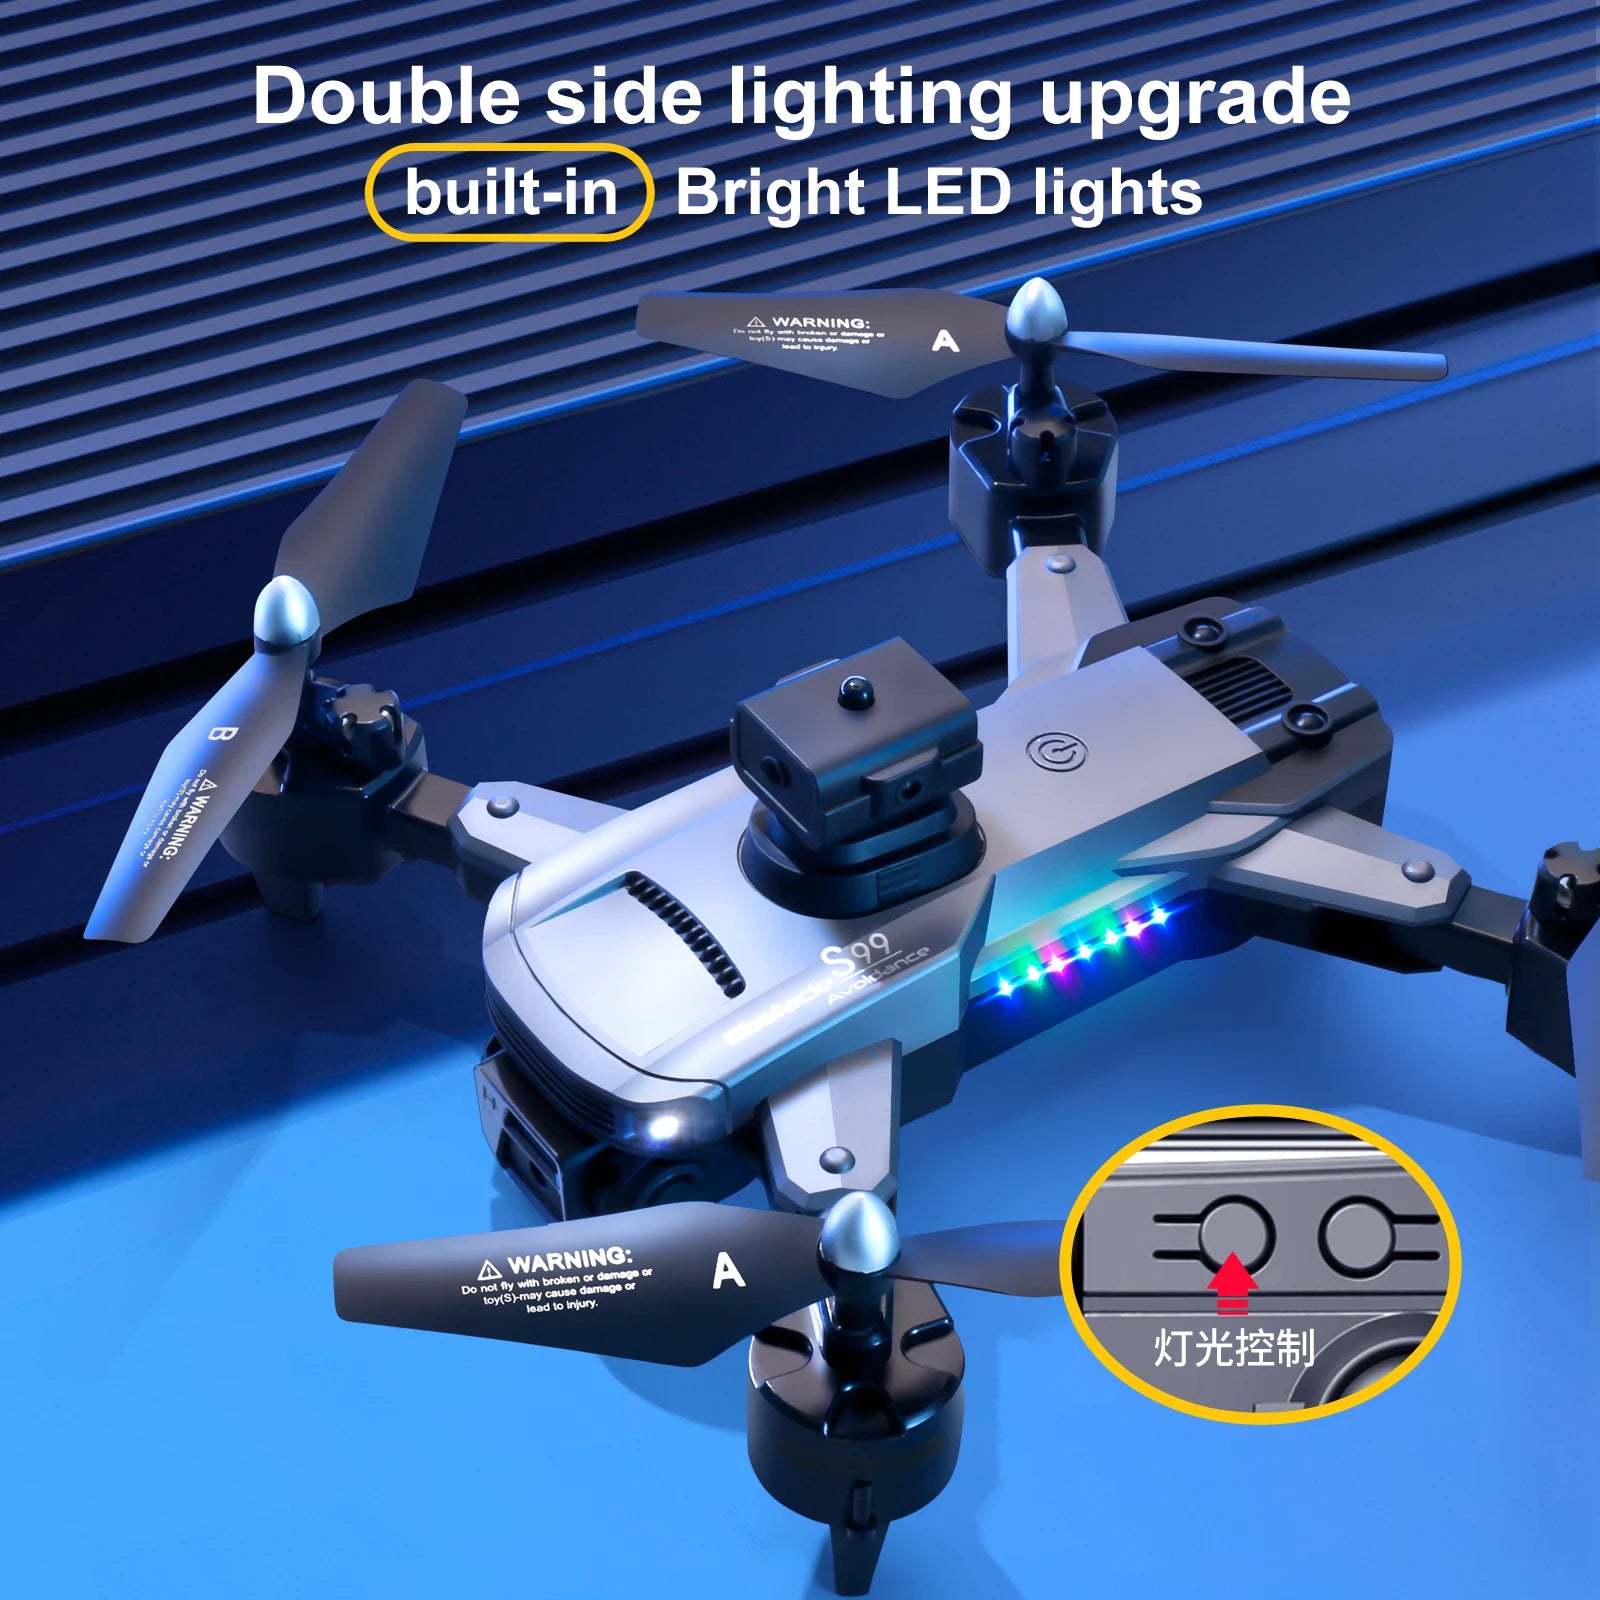 S99 Drone, double side lighting upgrade built-in bright led lights warning: h